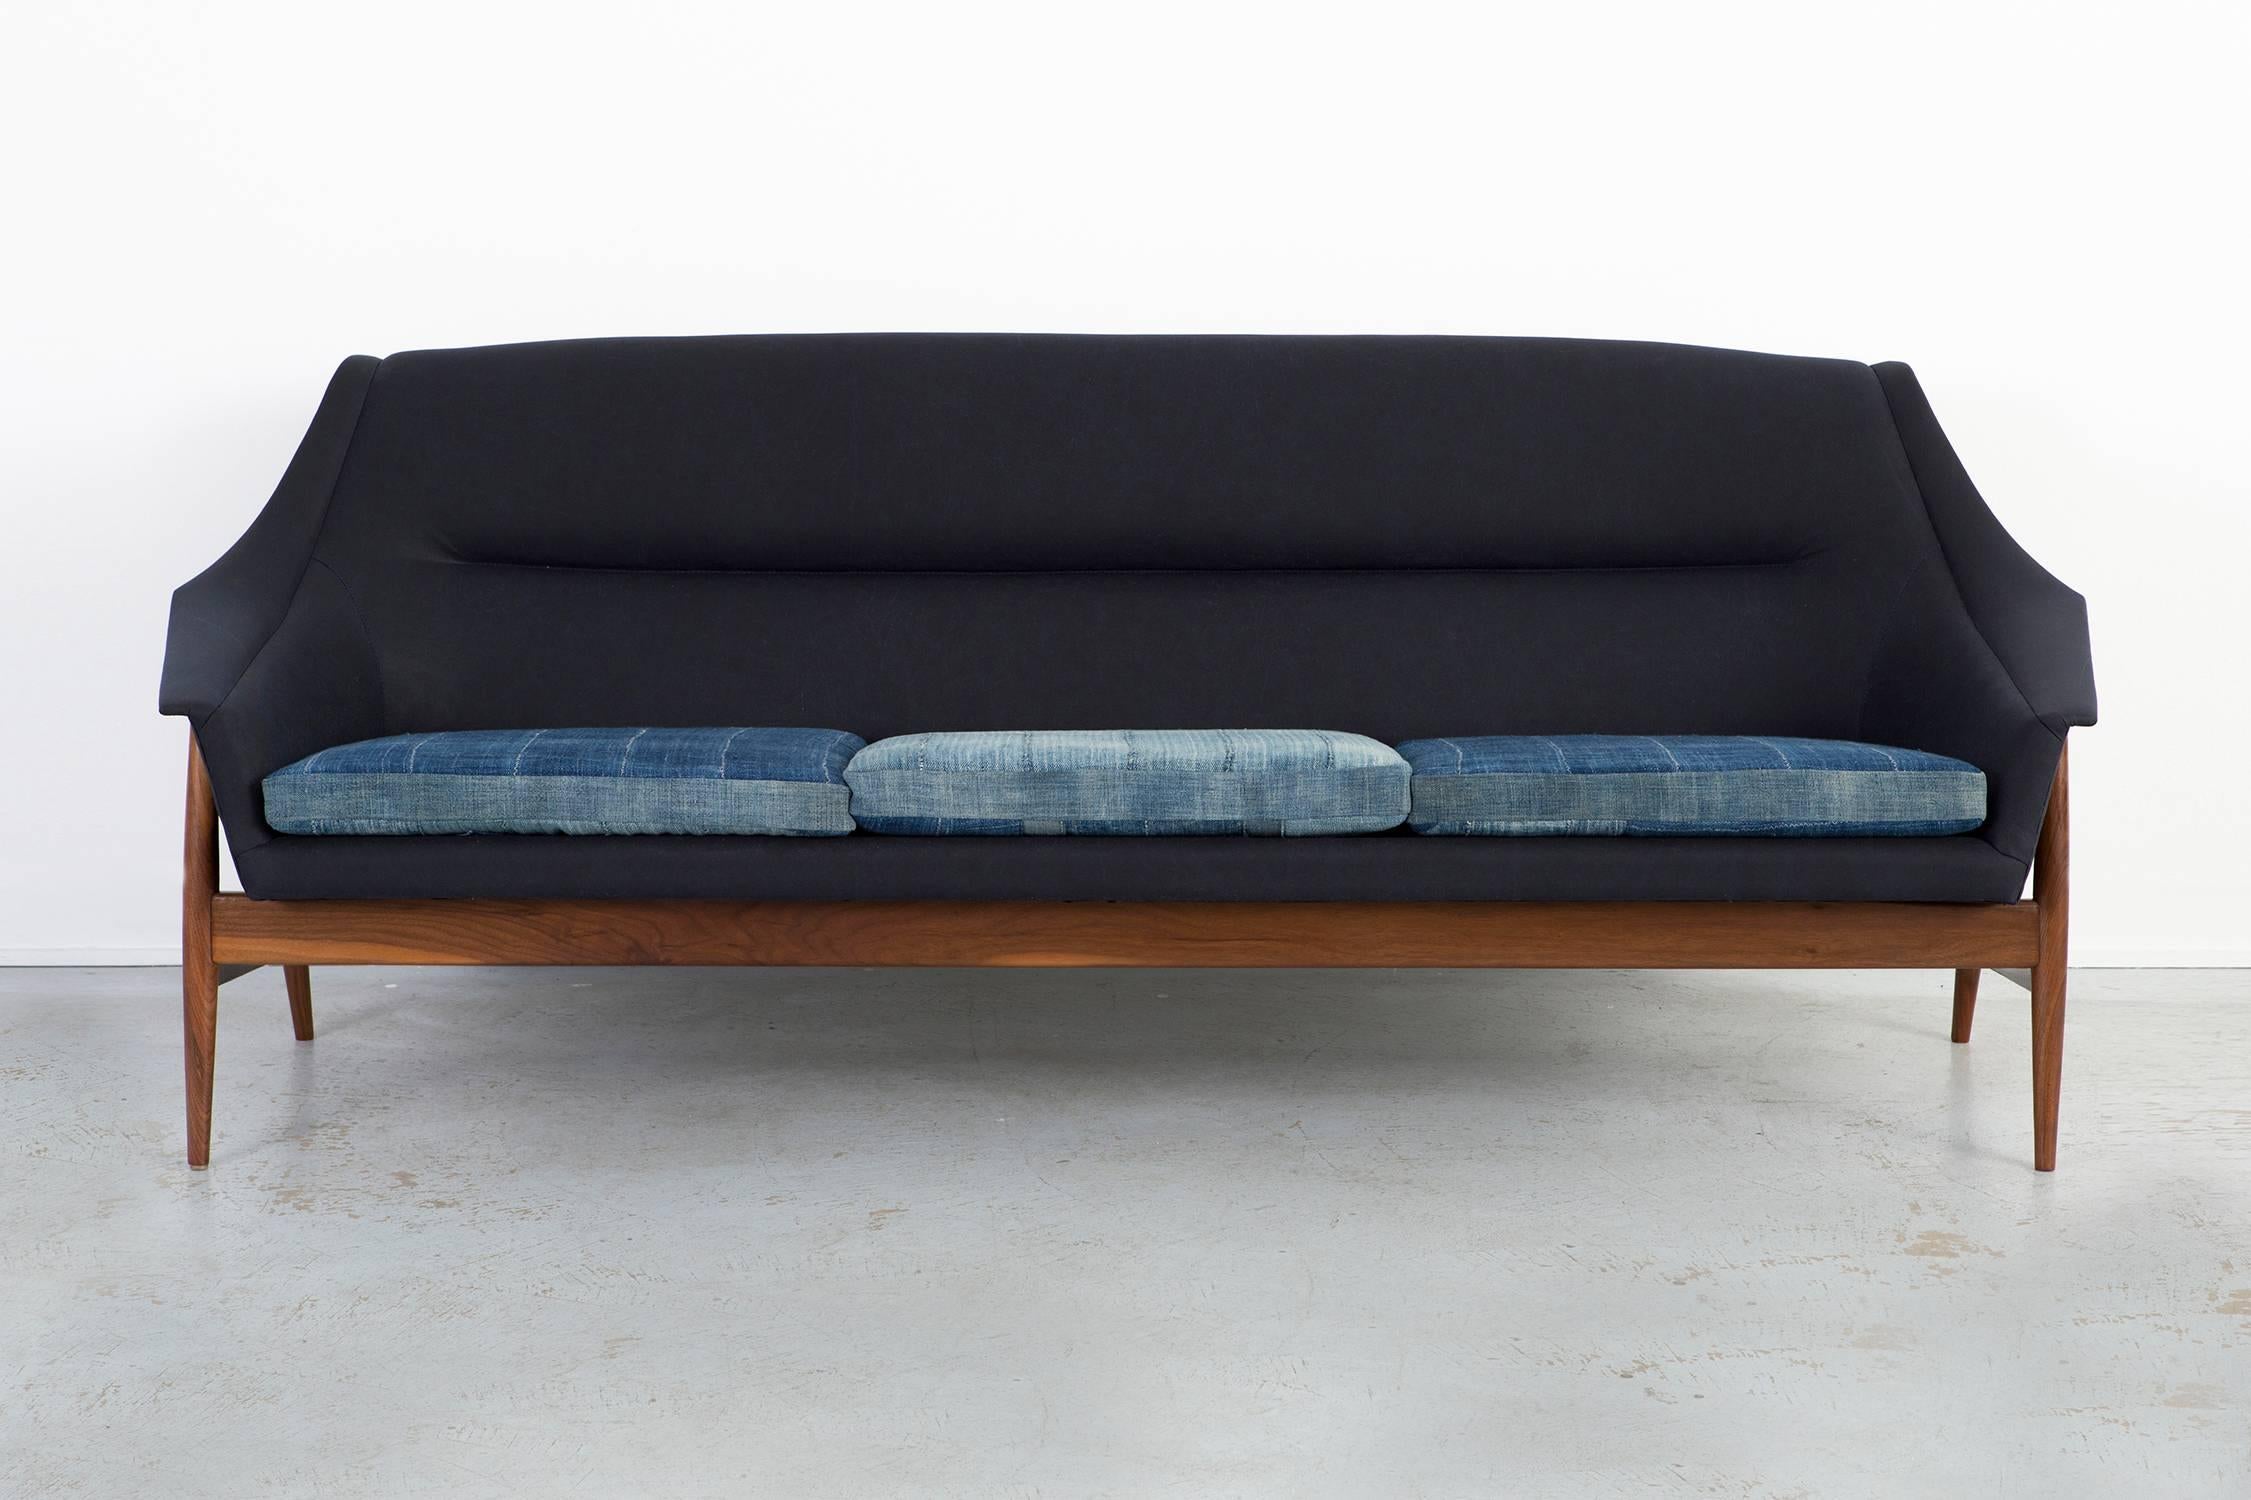 Sofa

Designed by DUX

Sweden, circa 1950s.

Reupholstered in waxed canvas and cotton reversible cushions

Measures: 31” H x 82” W x 27” D x seat 17 ¼” H.

Fabric sample available upon request.